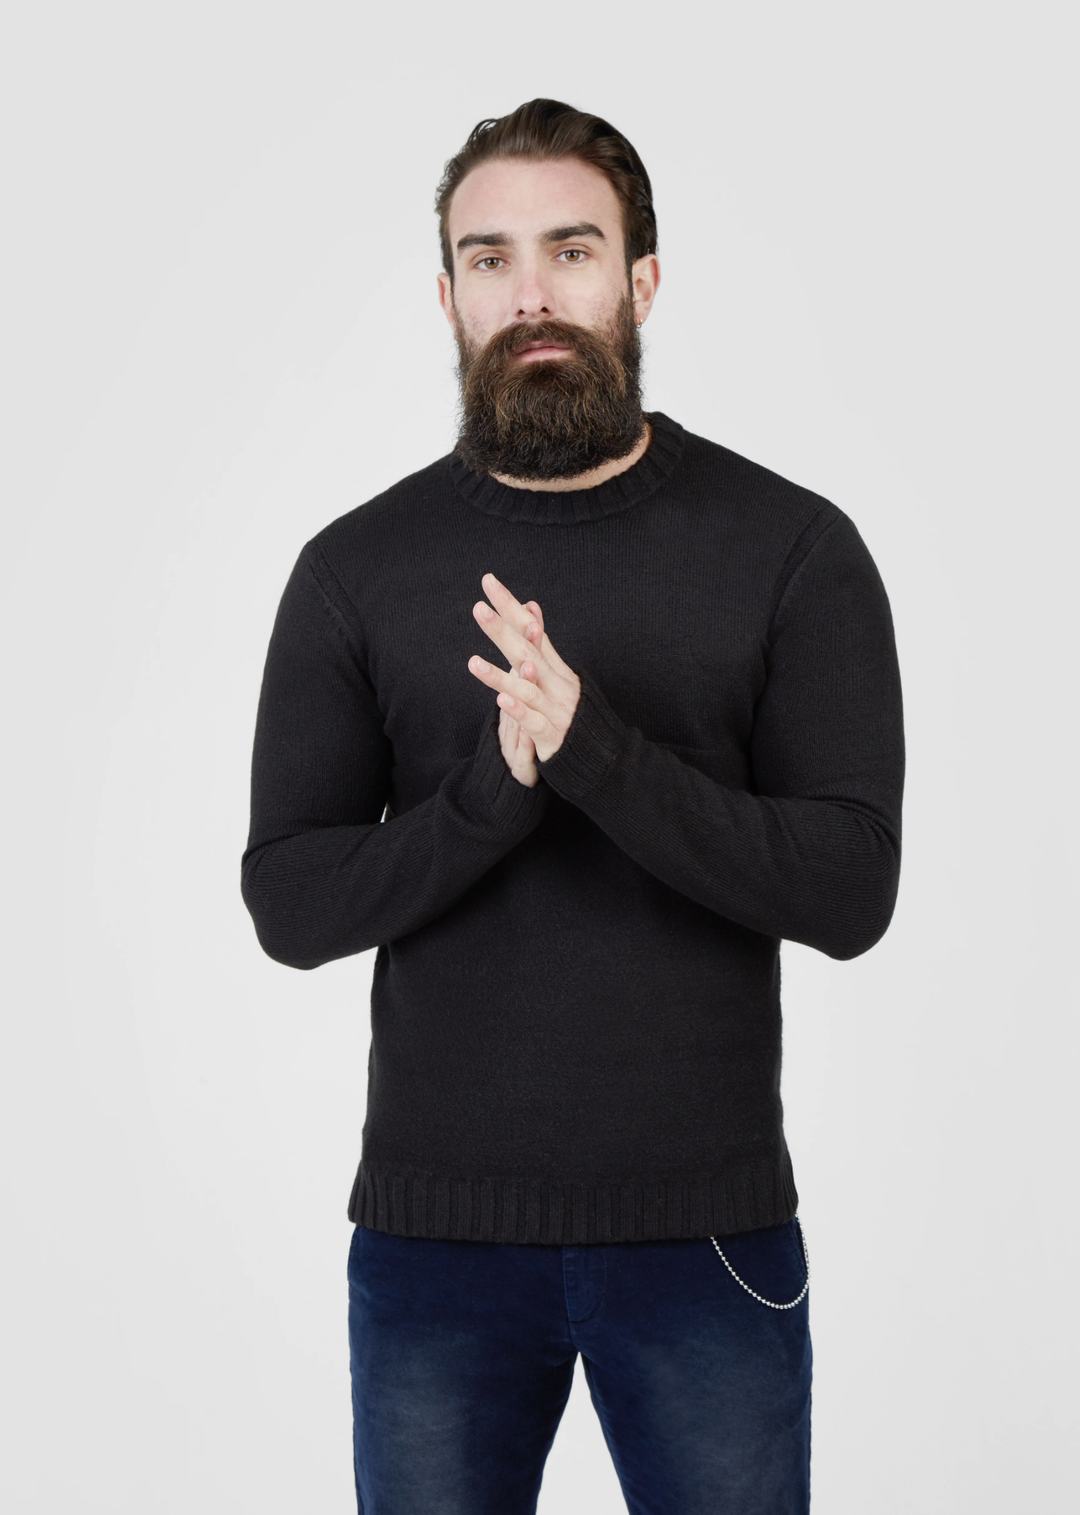 Pearly King Nevis Mohair Mix Knit Jumper in Charcoal